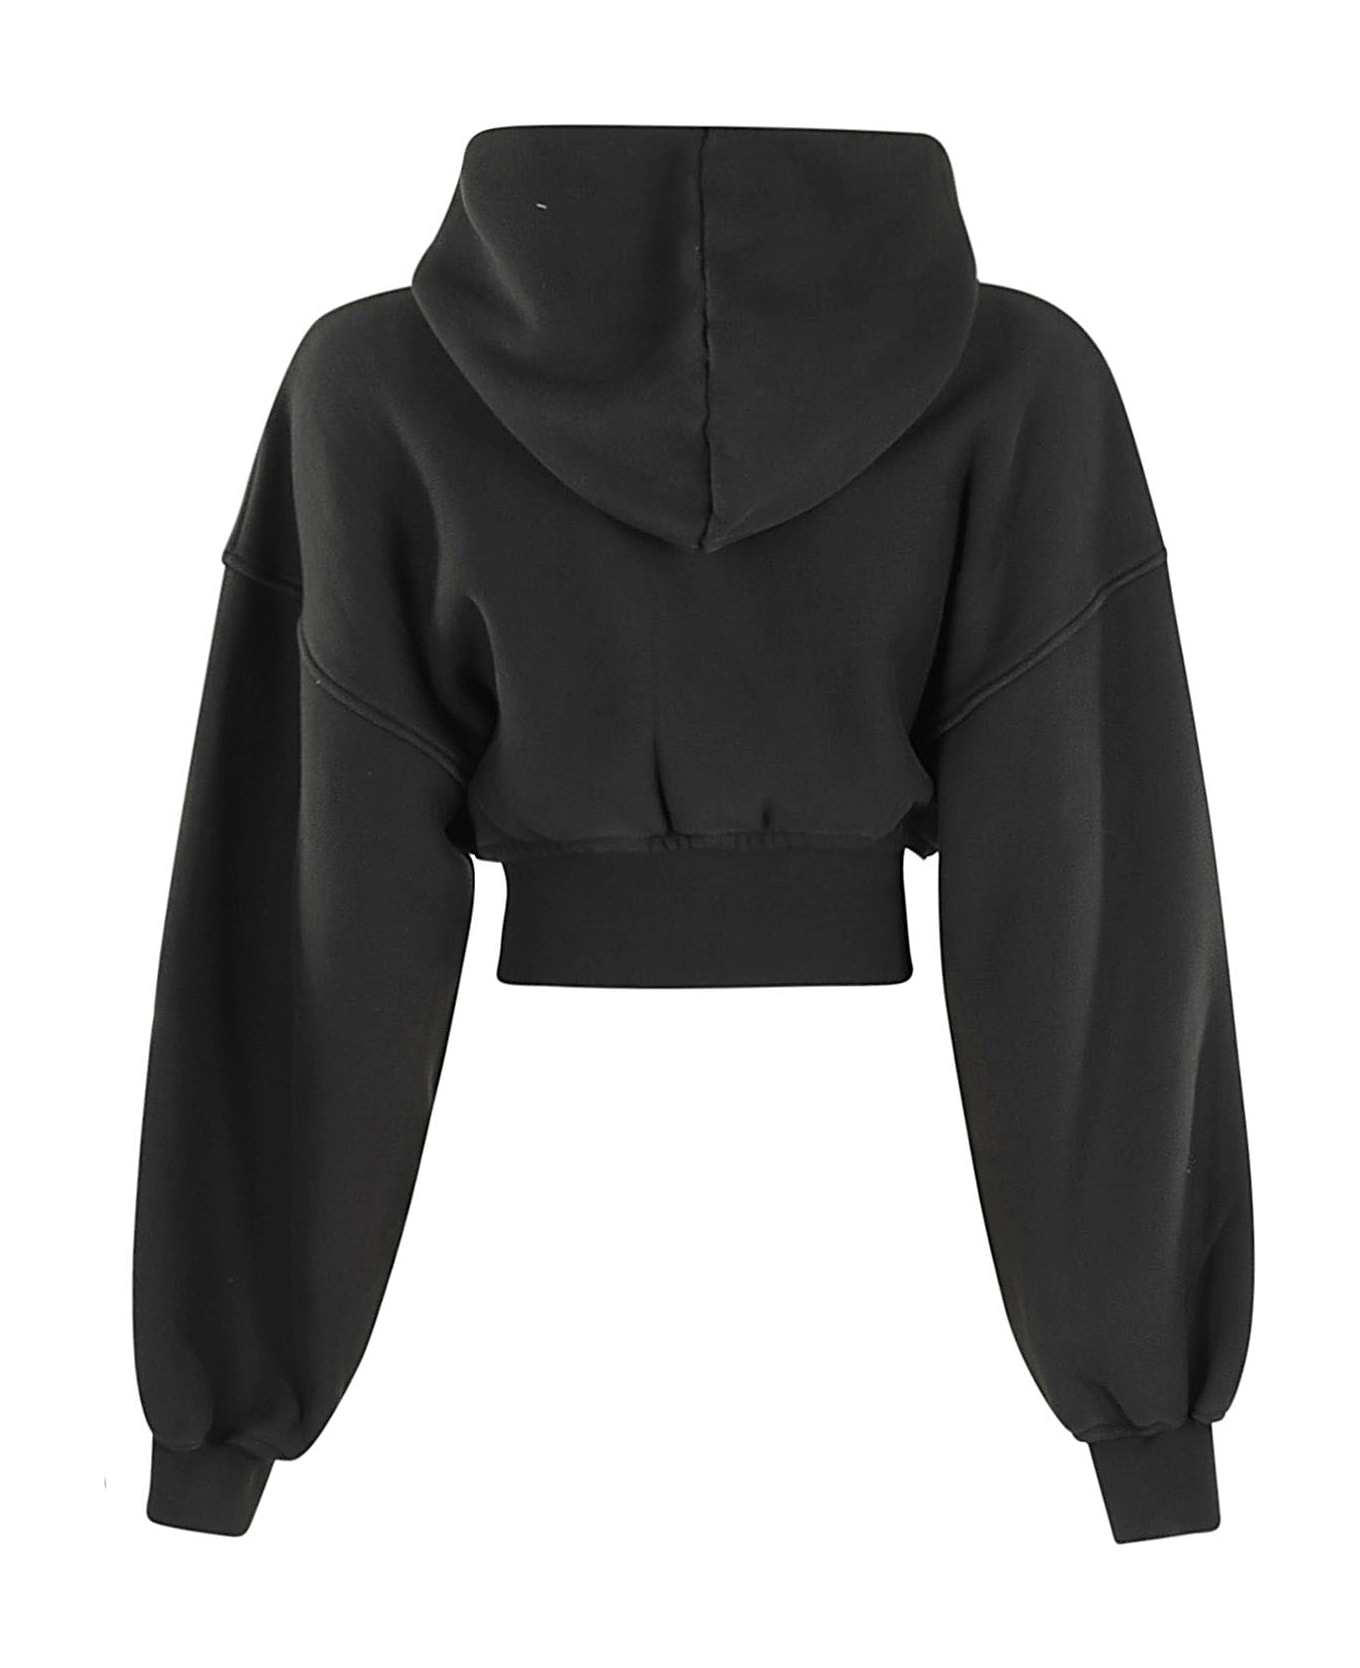 T by Alexander Wang Cropped Zip Up Hoodie - A